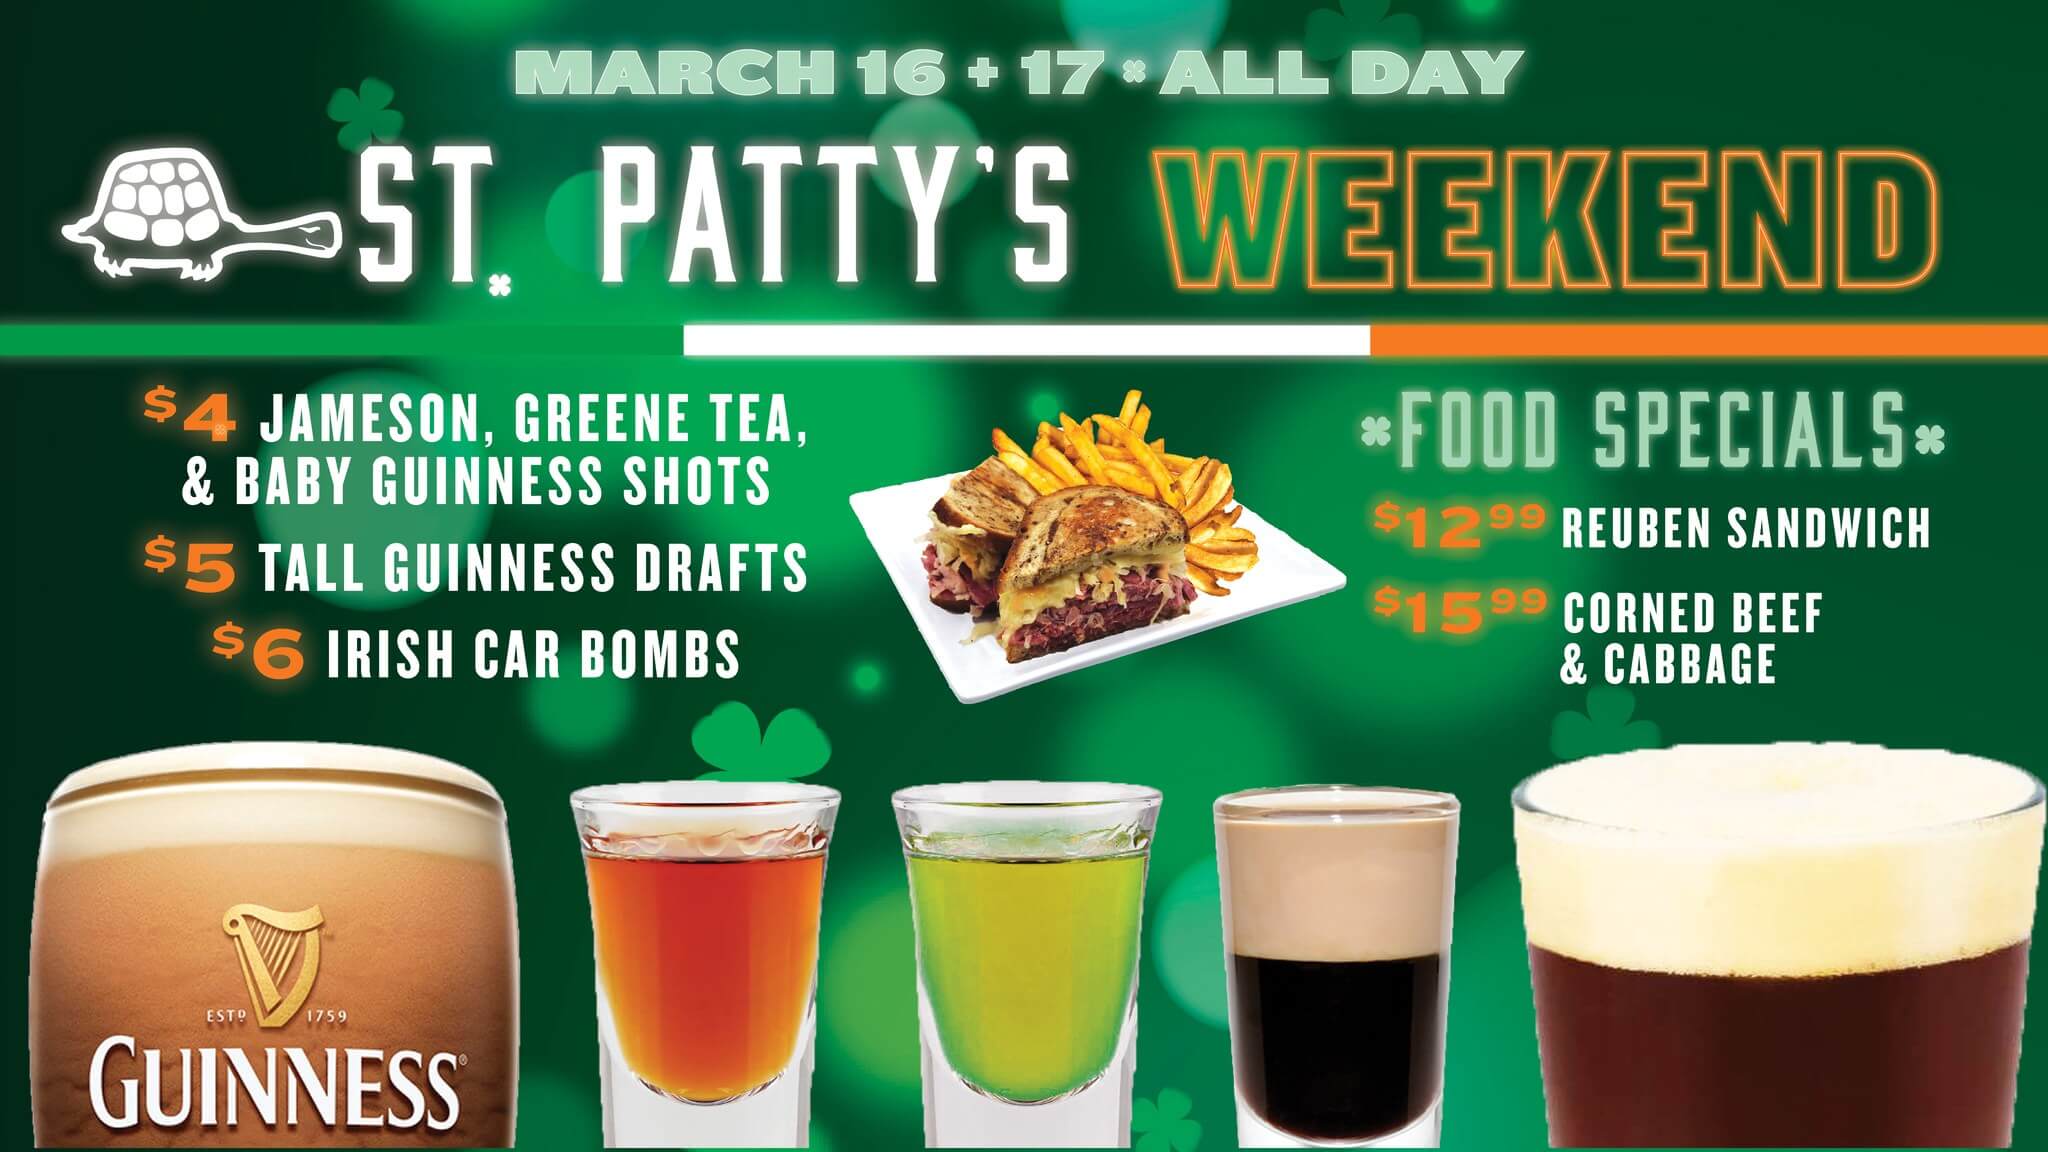 St. Patty's Weekend Specials at Deep Creek Lake, MD